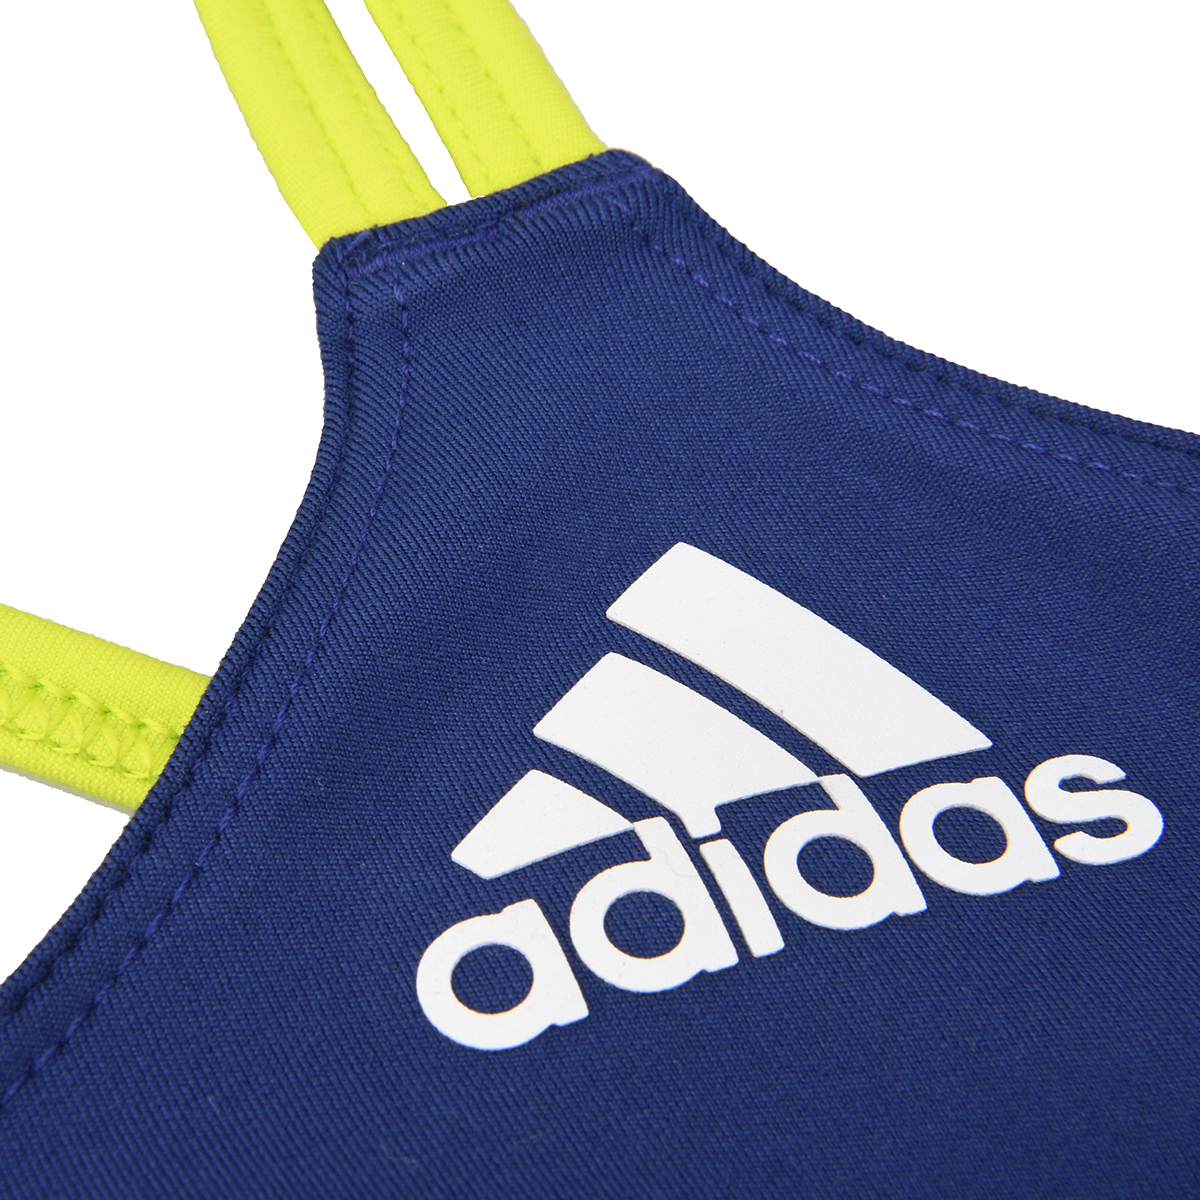 Top adidas Aeroready Infantil,  image number null